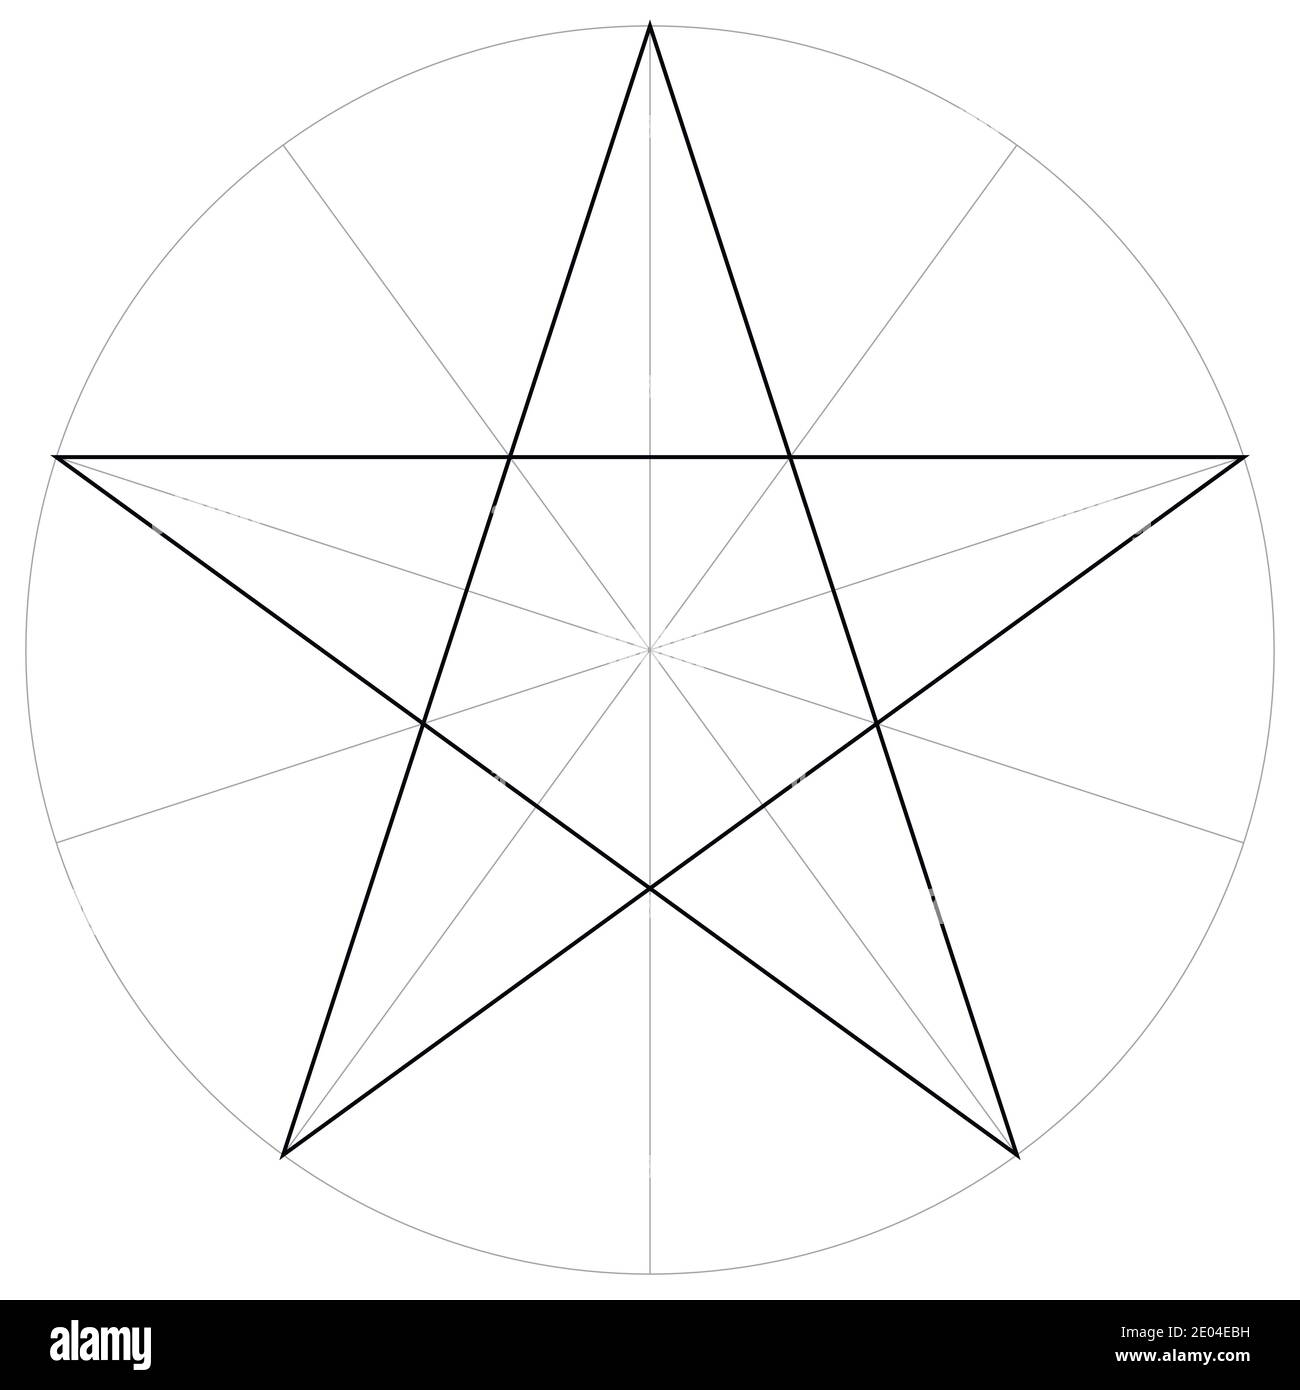 correct form shape template geometric shape of the pentagram five pointed star, vector drawing the pentagram in a circle by sector, template Stock Vector